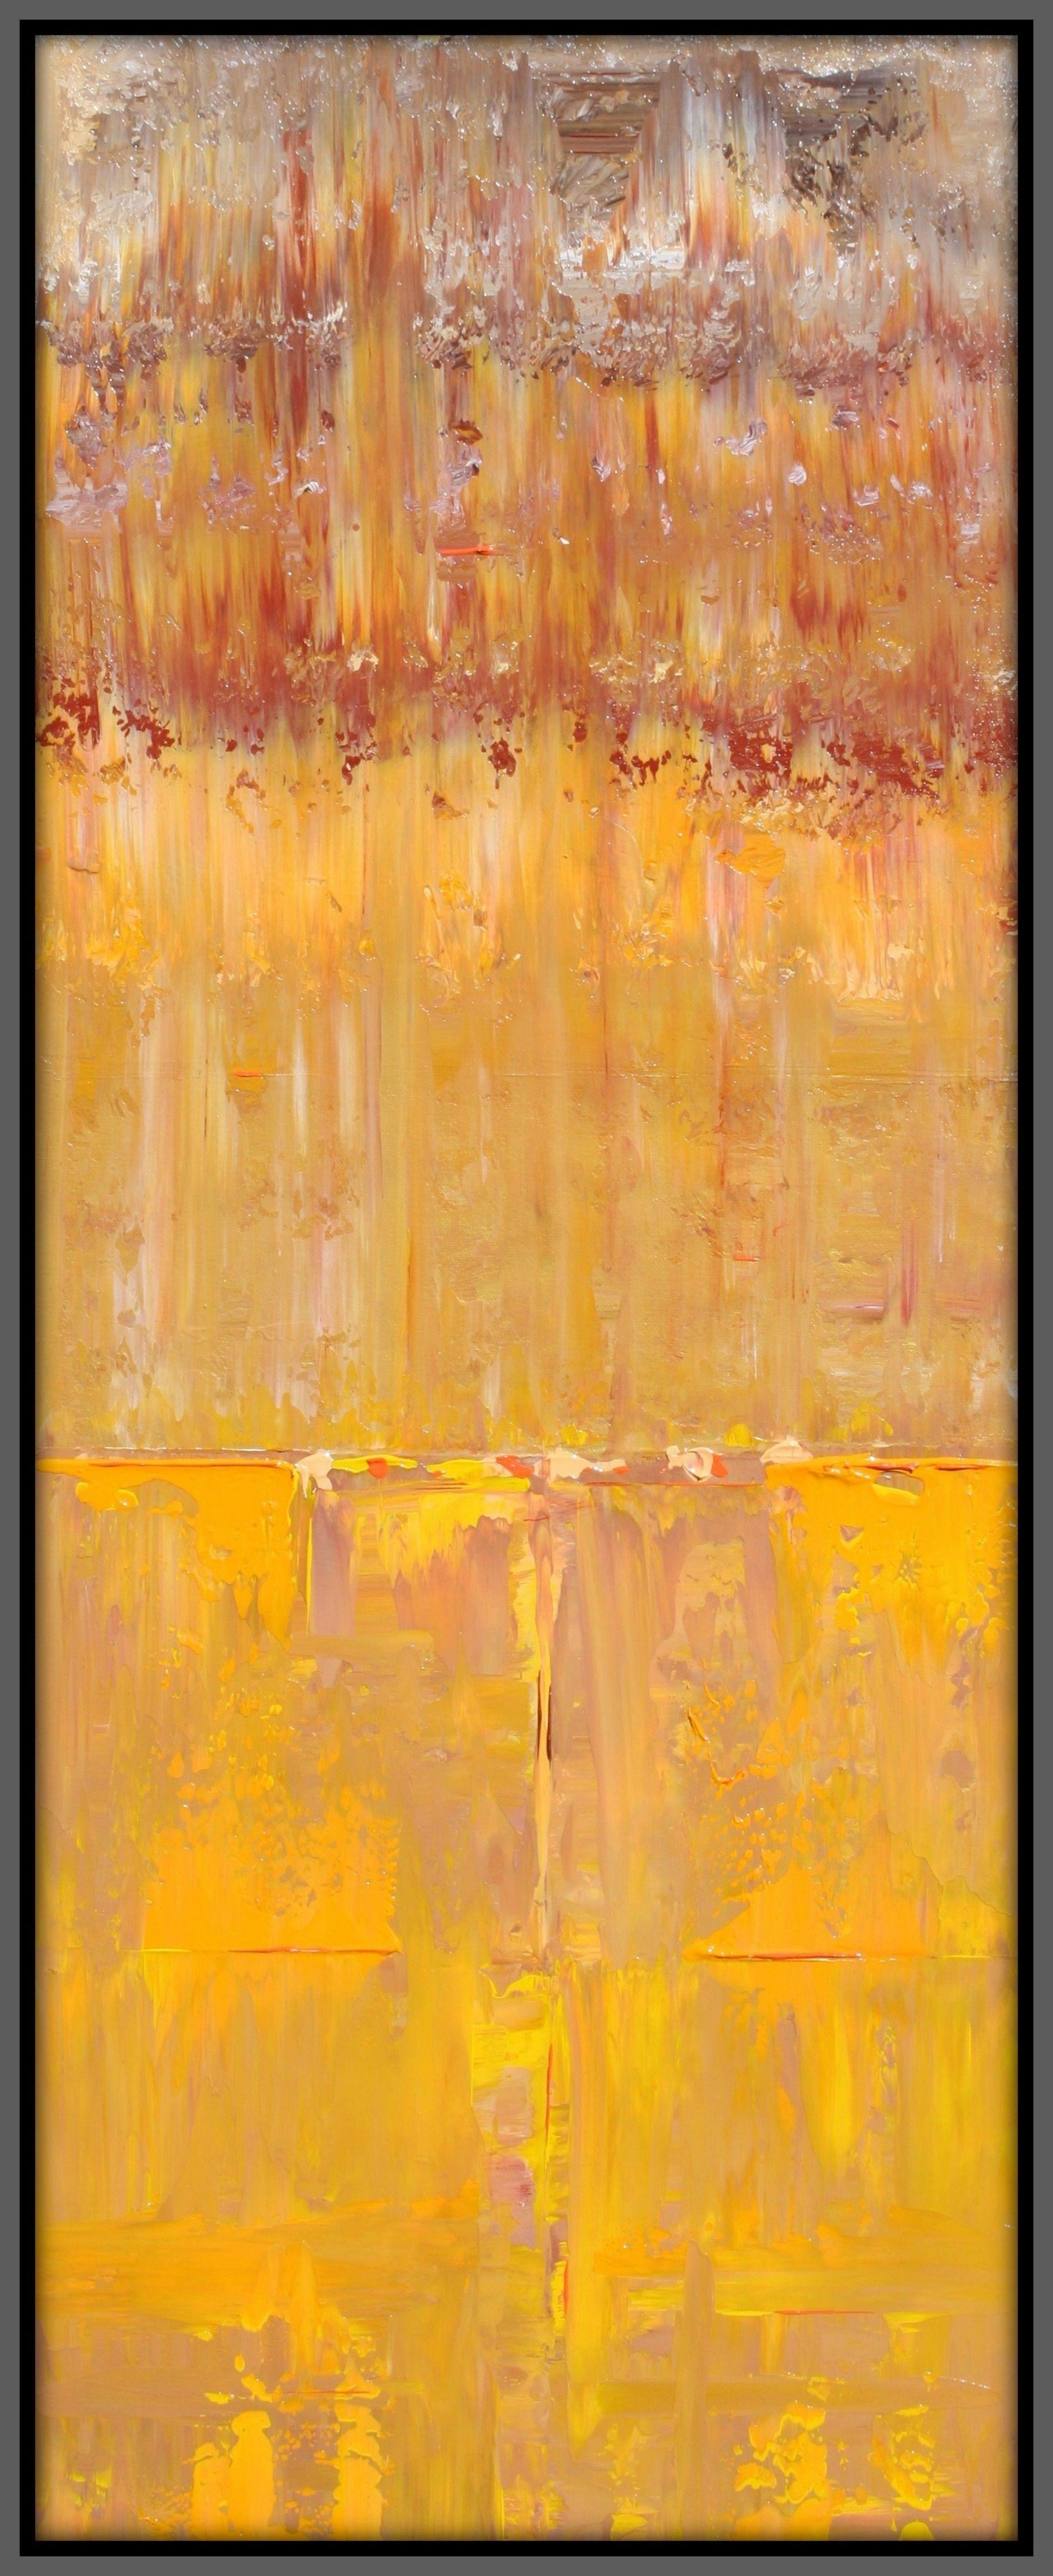 Abstract Autumn Concept, Painting, Acrylic on Canvas - Brown Abstract Painting by Robert Lynn